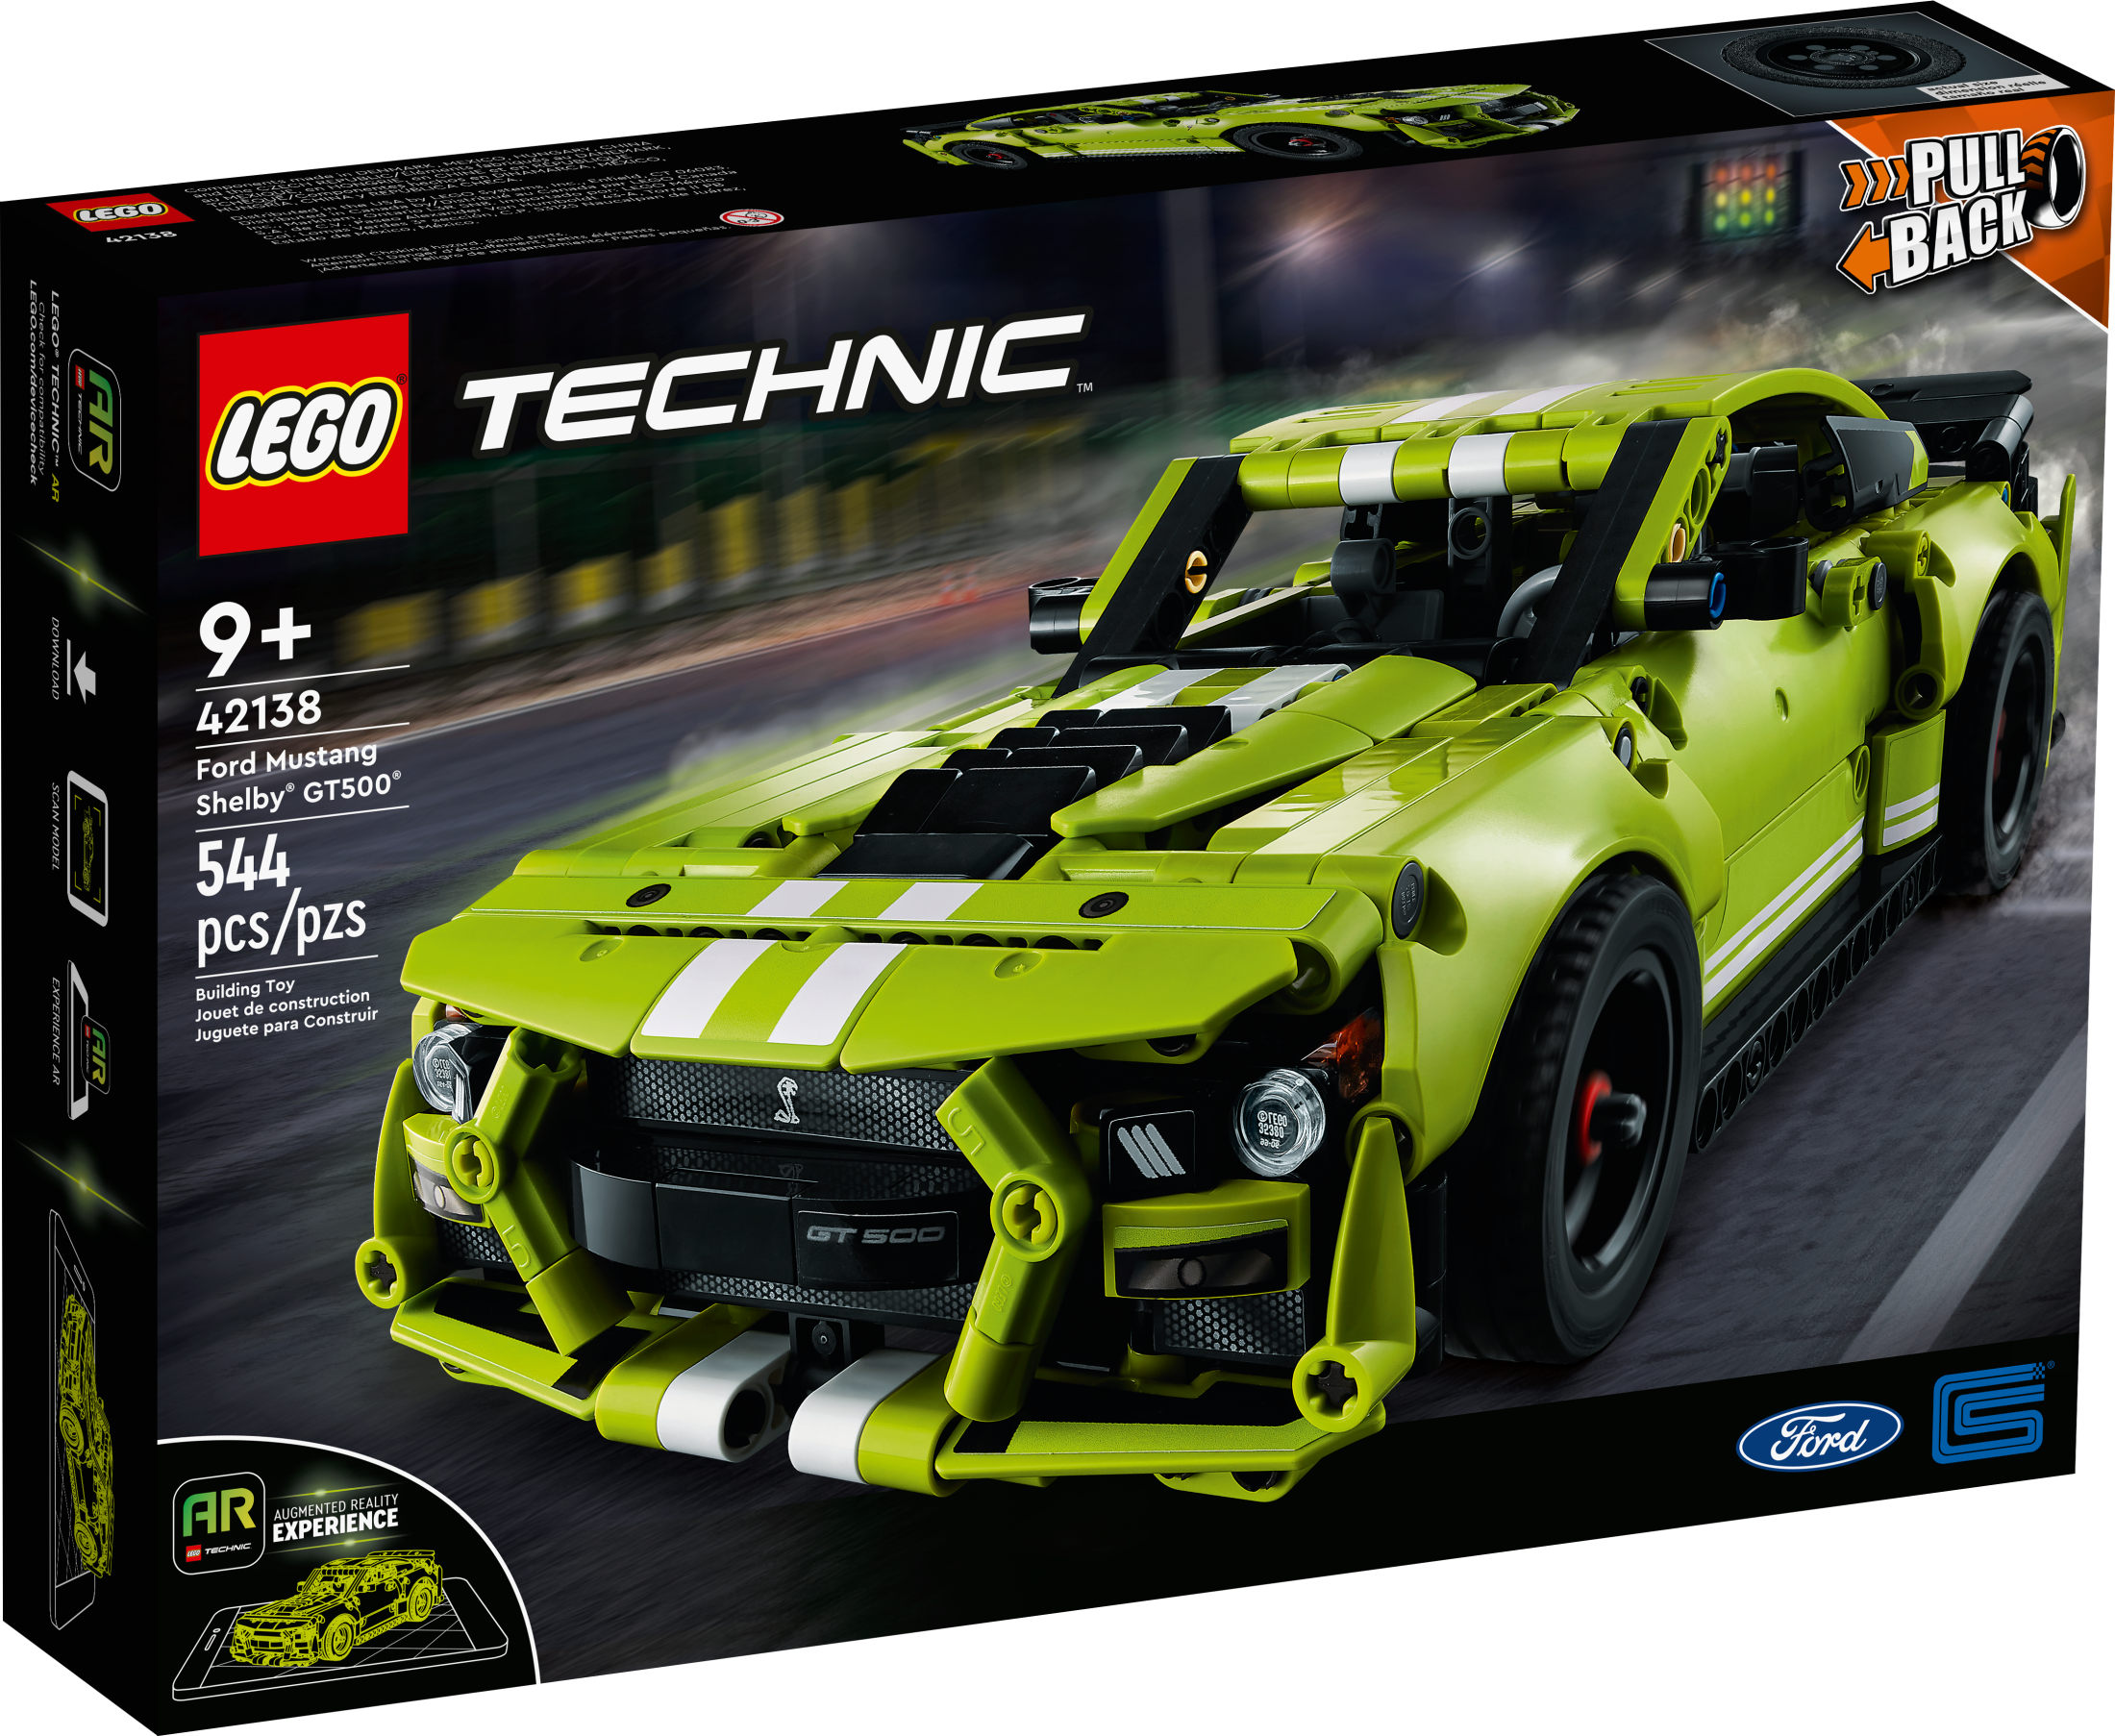 LEGO Technic Ford Mustang Shelby GT500 Building Set 42138 - Pull Back Drag Race Toy Car Model Kit, Featuring AR App for Fast Action Play, Great Gift for Boys, Girls, and Teens Ages 9+ - image 4 of 9